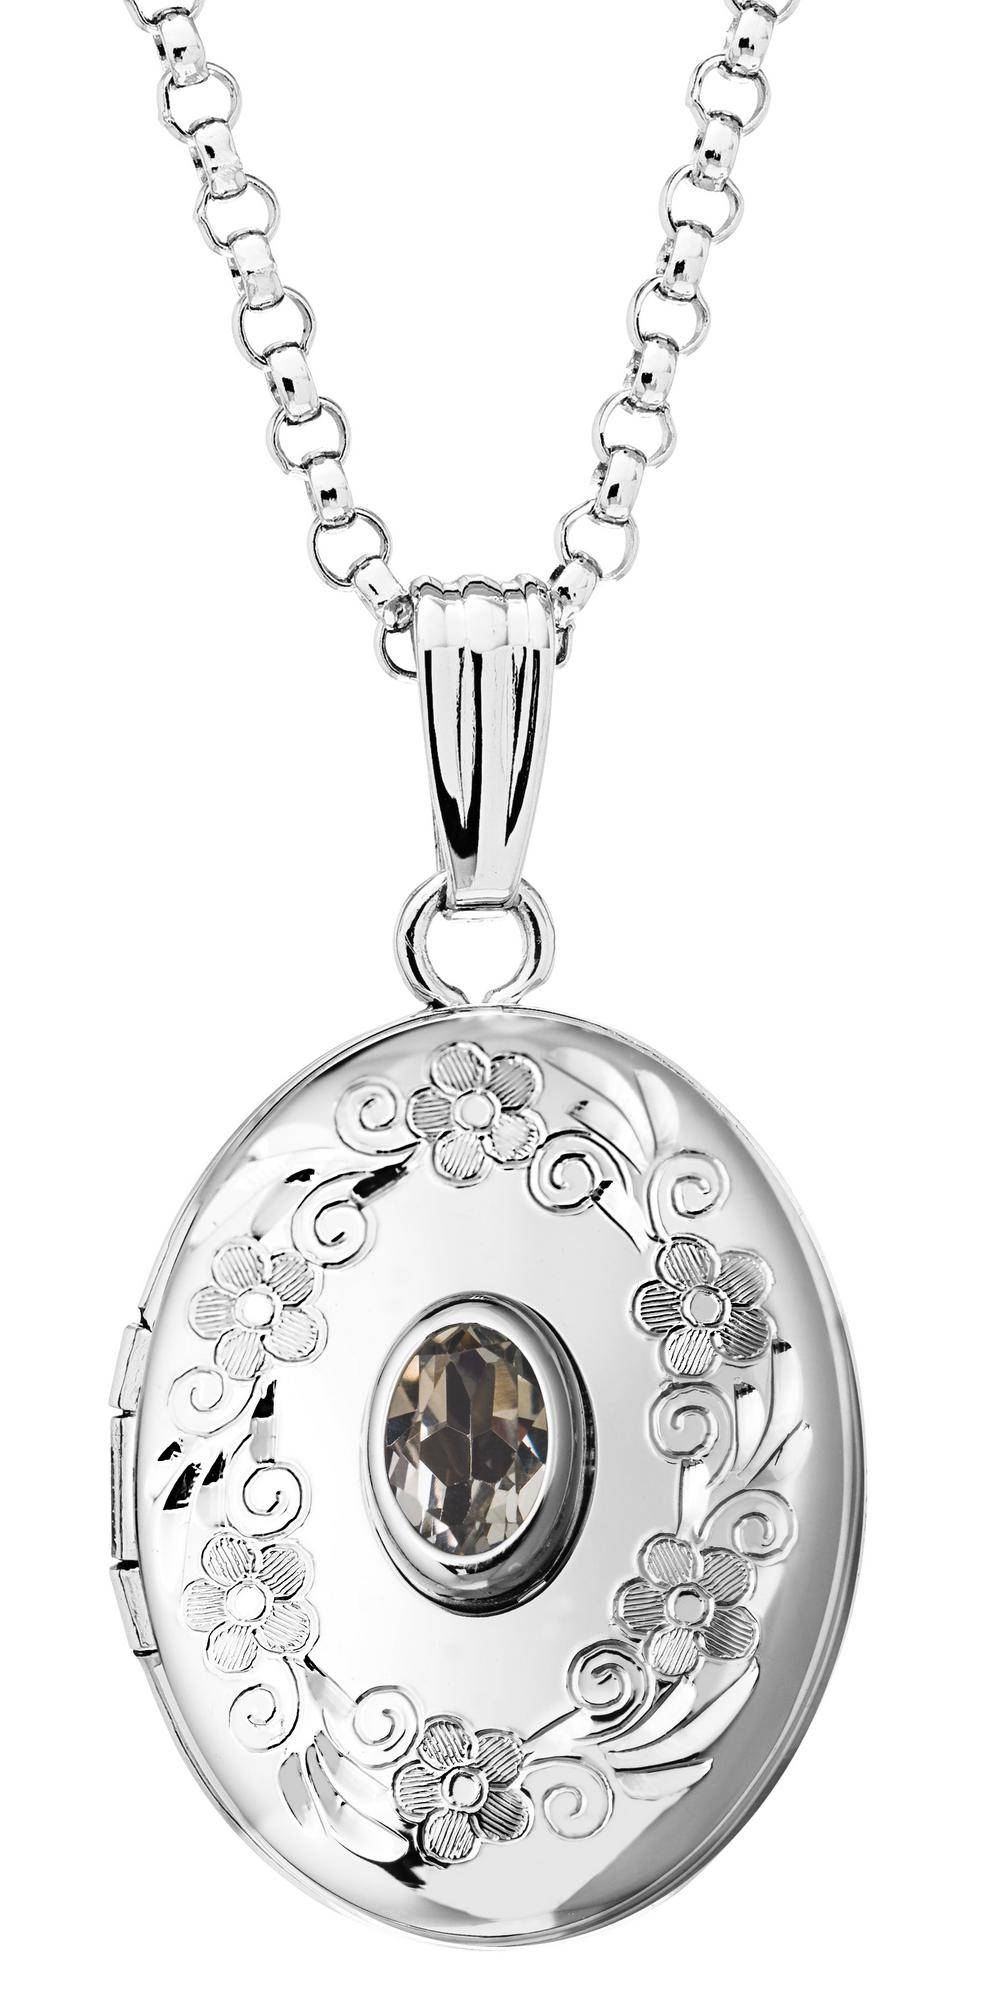 Sterling Silver Genuine Topaz Oval Locket Necklace March Birthstone Personalized Engraved Monogram